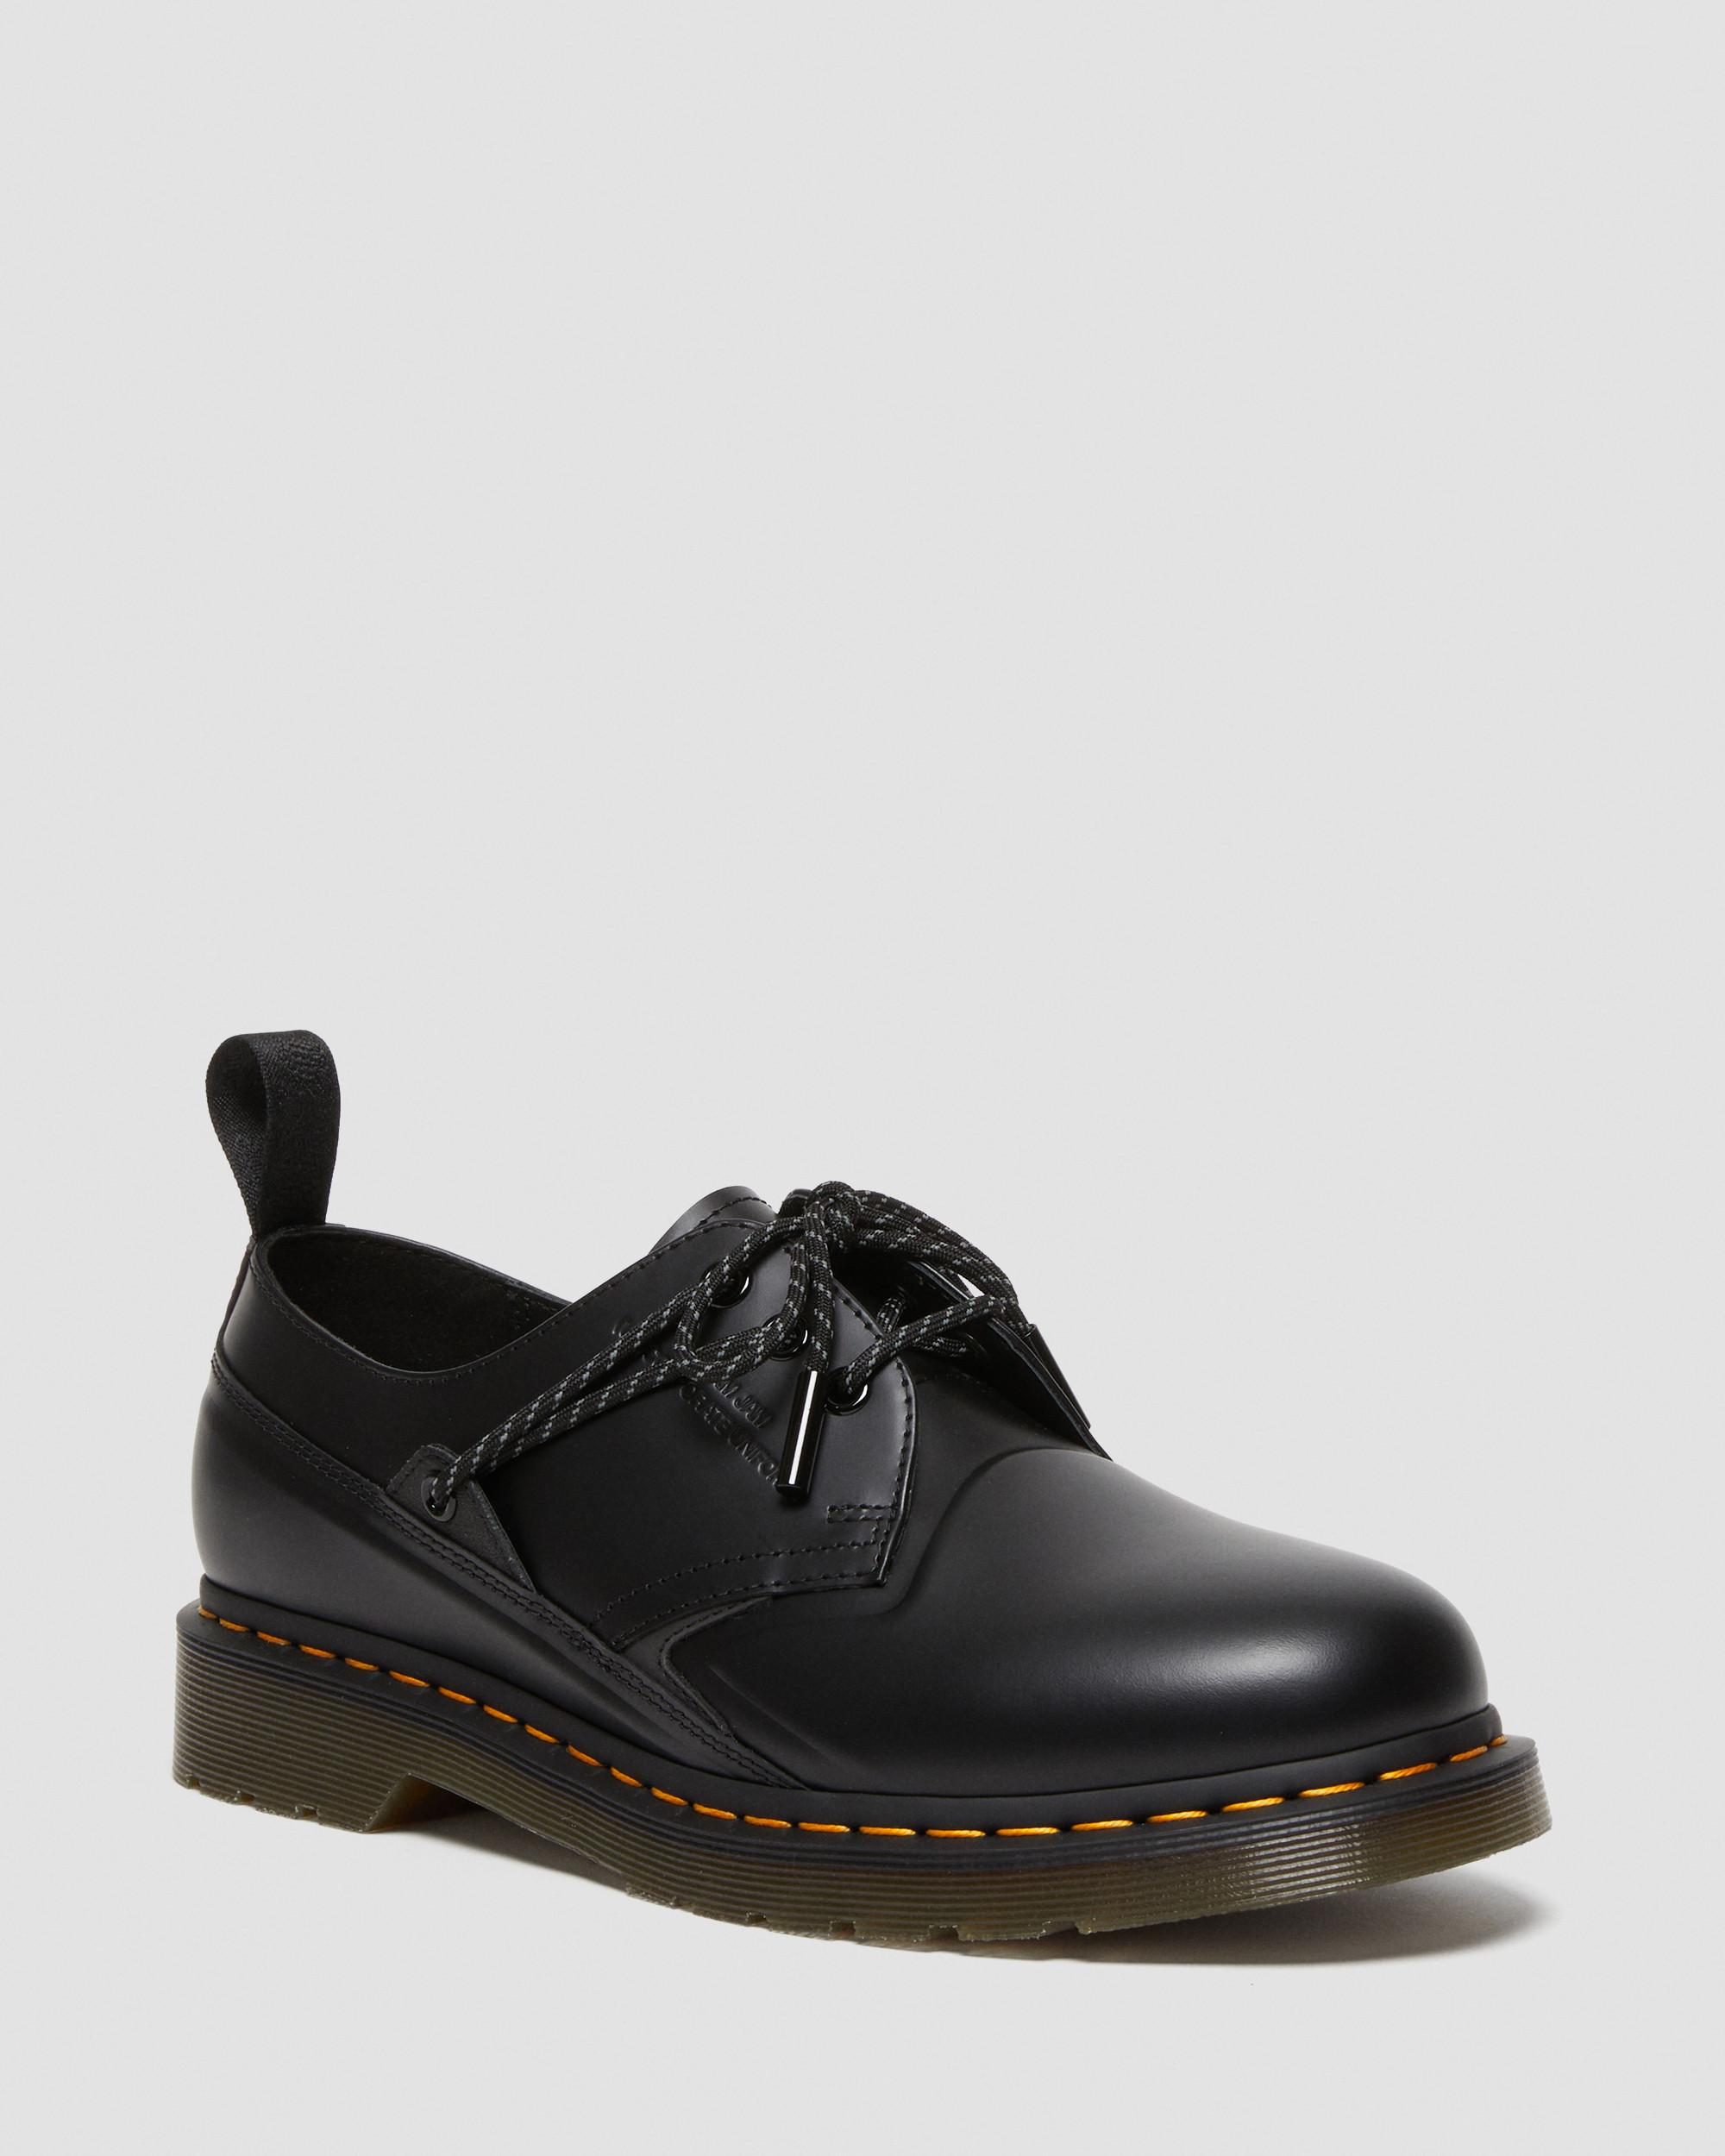 1461 Slam Jam Smooth Leather Shoes in Black